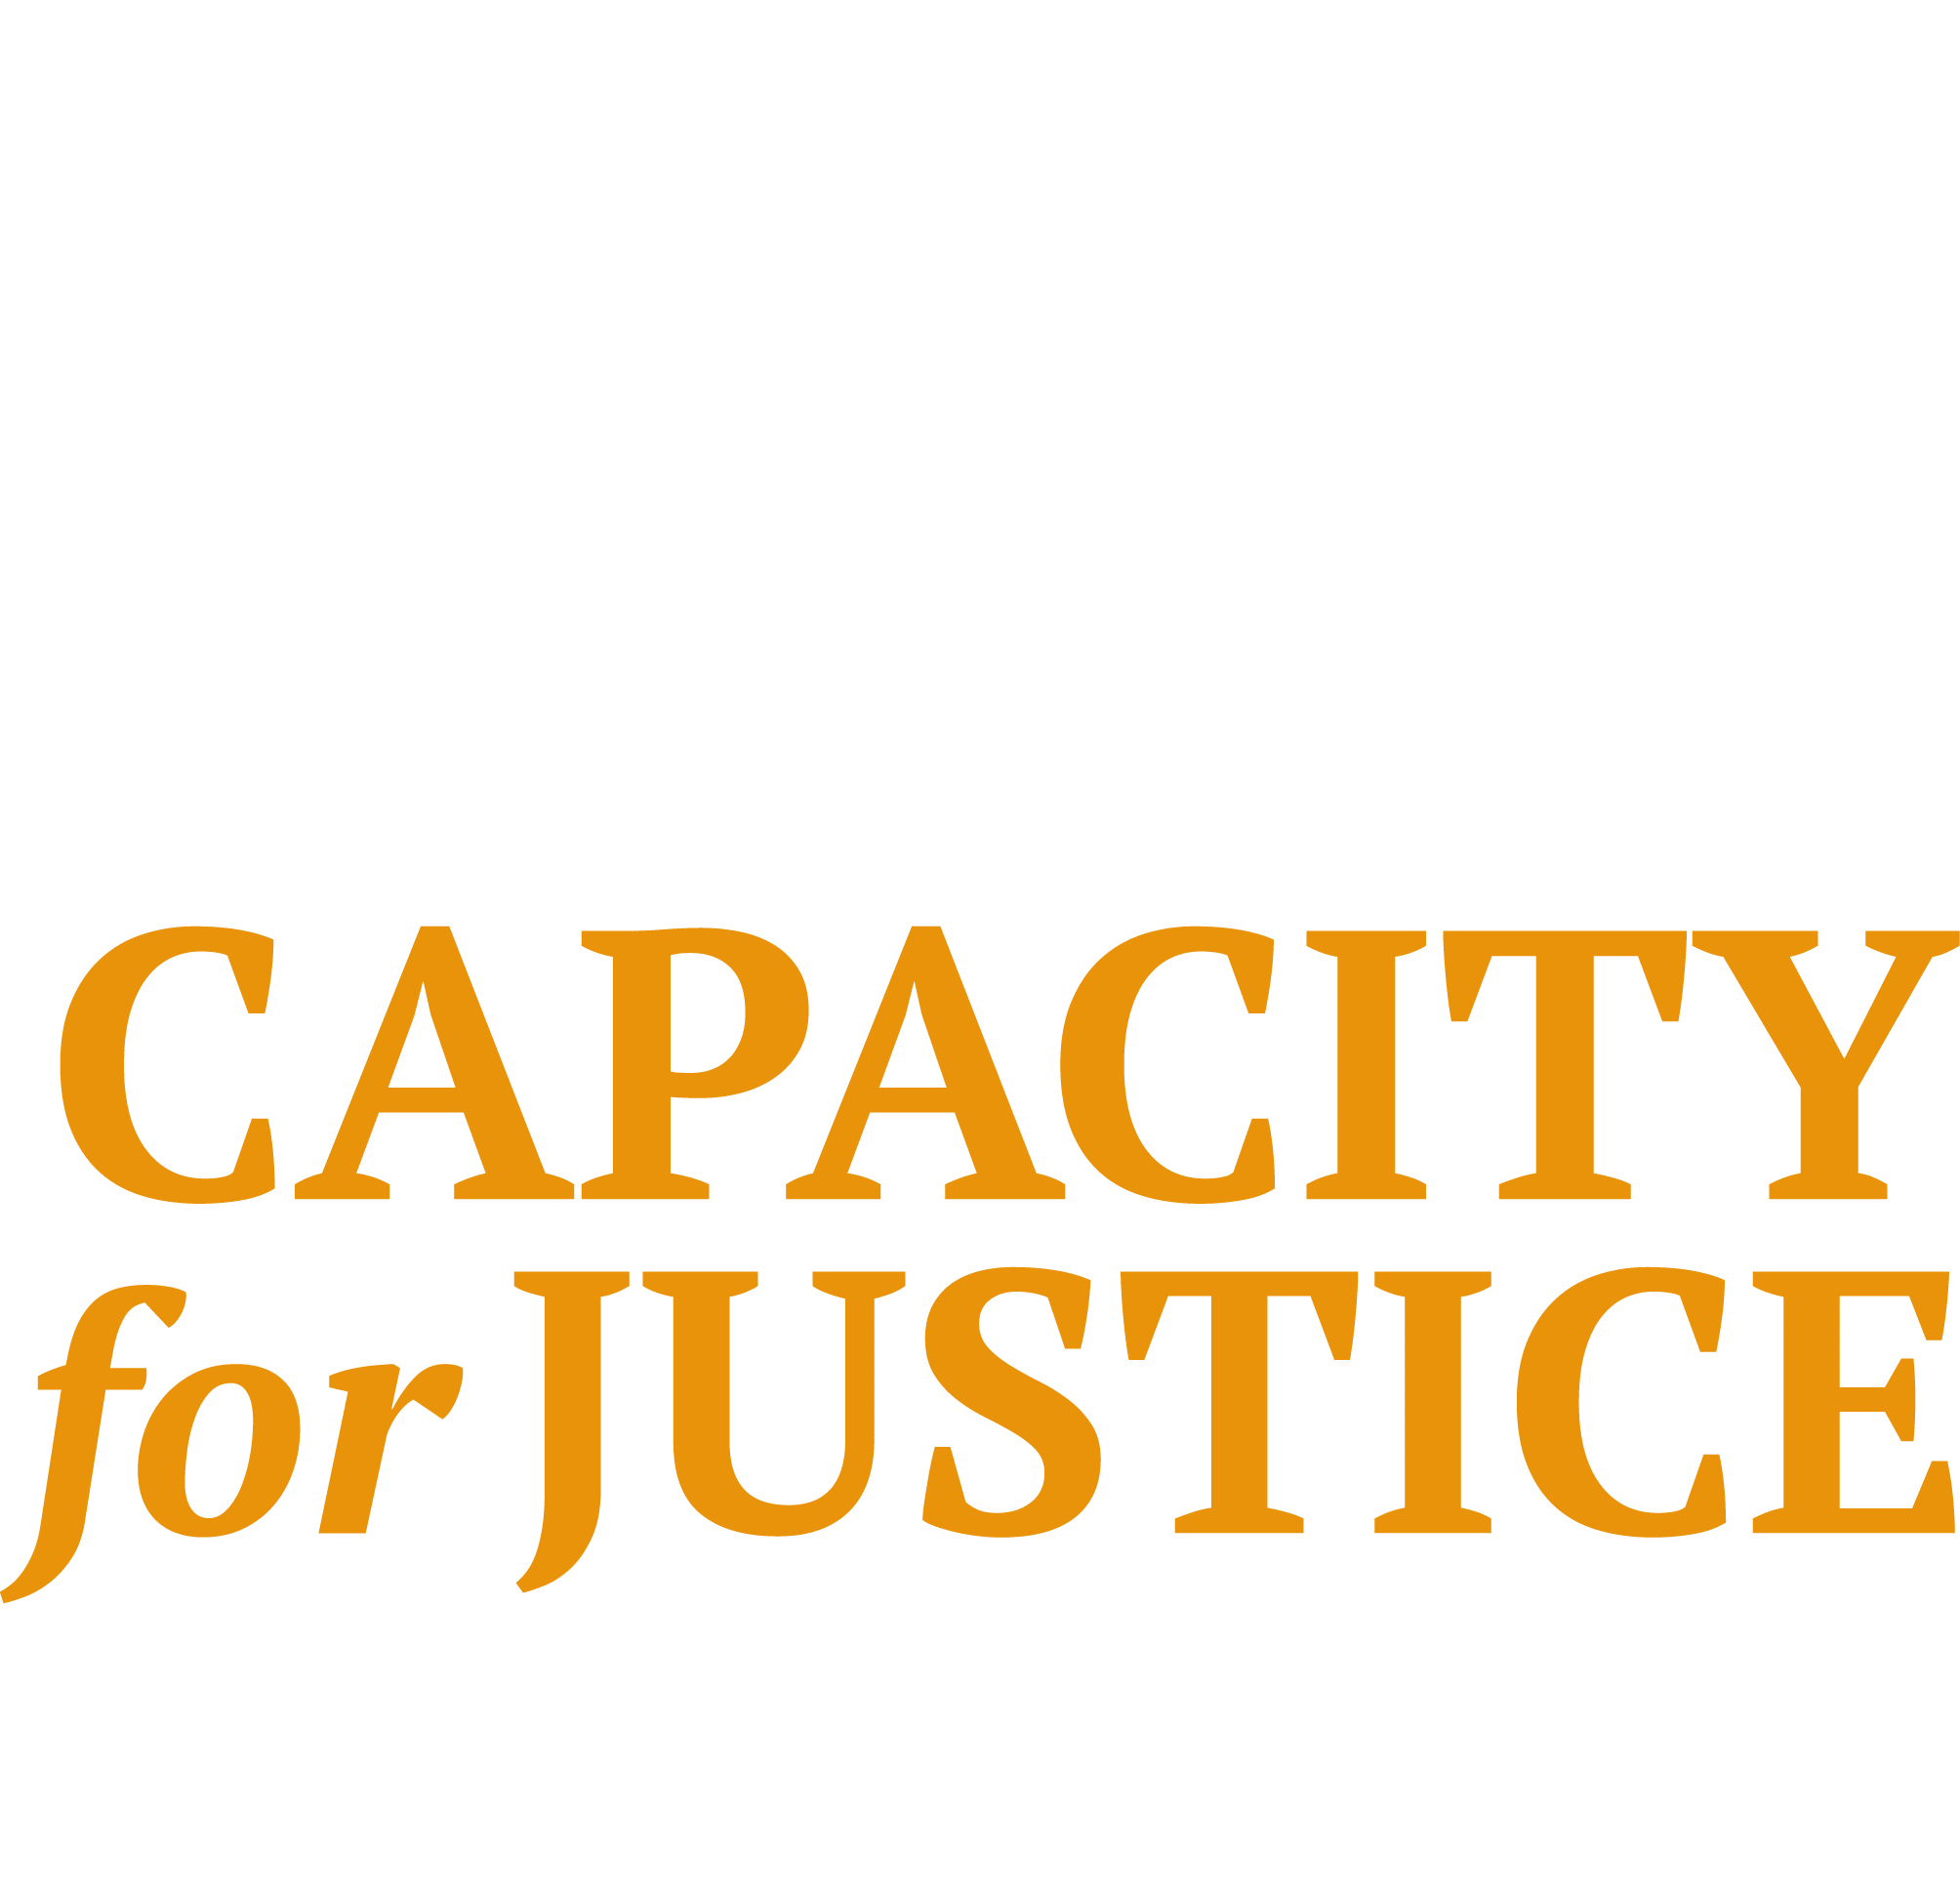 Capacity for Justice